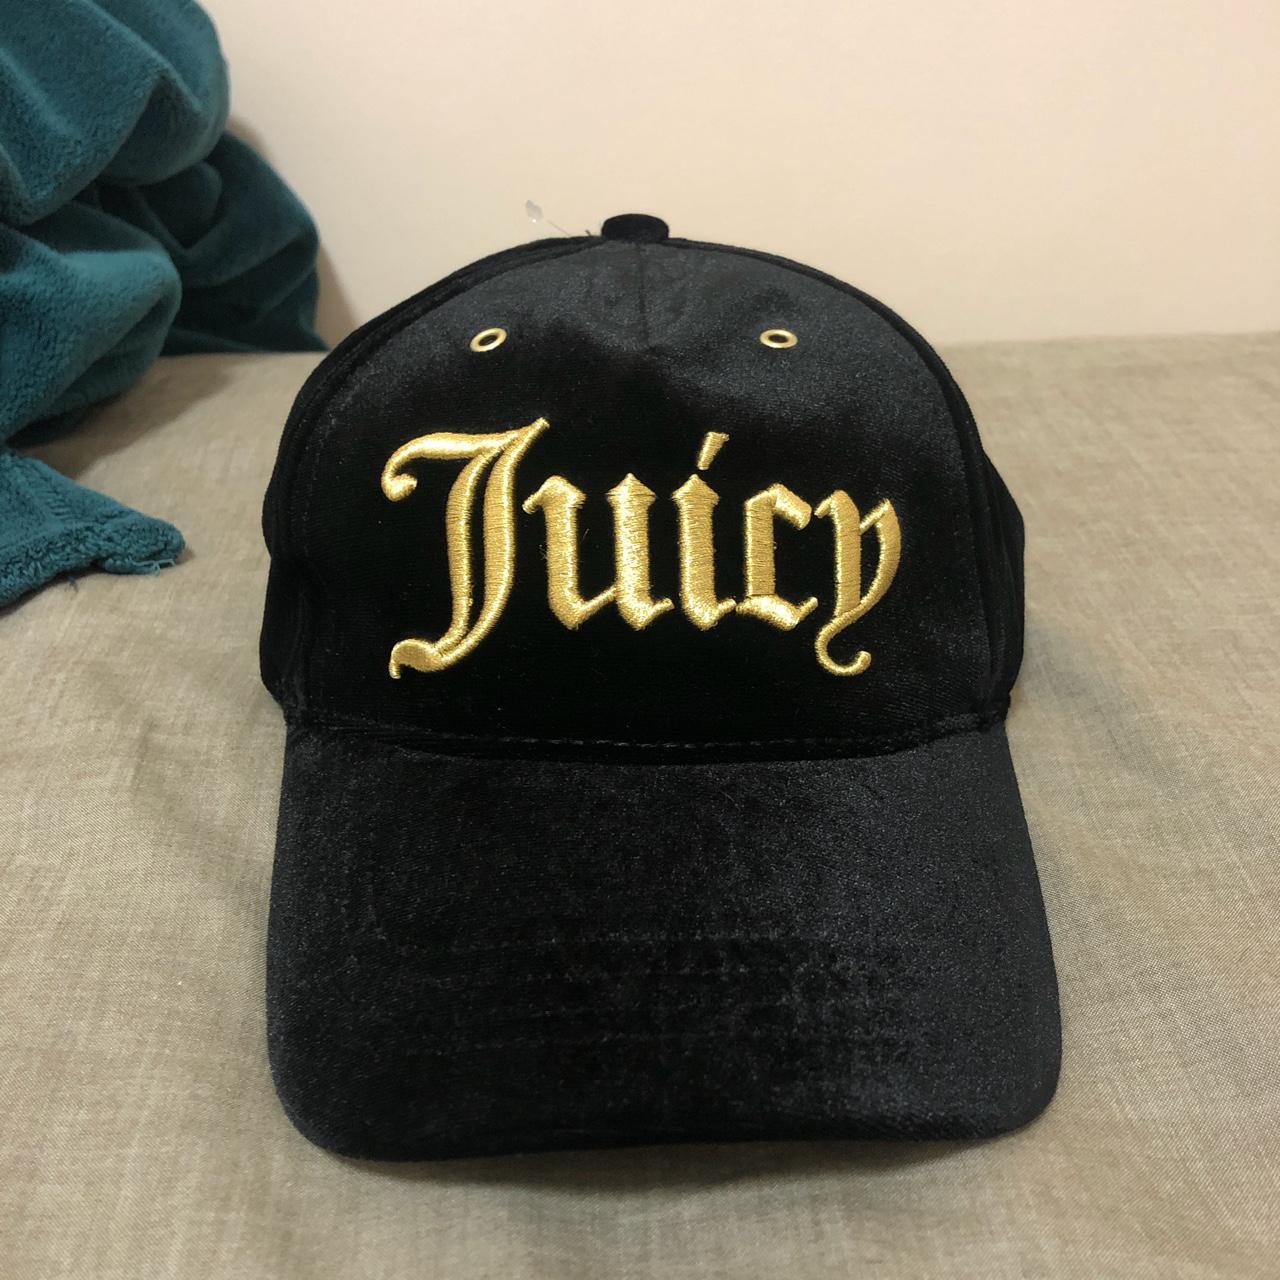 Juicy Couture Women's Black and Gold Hat